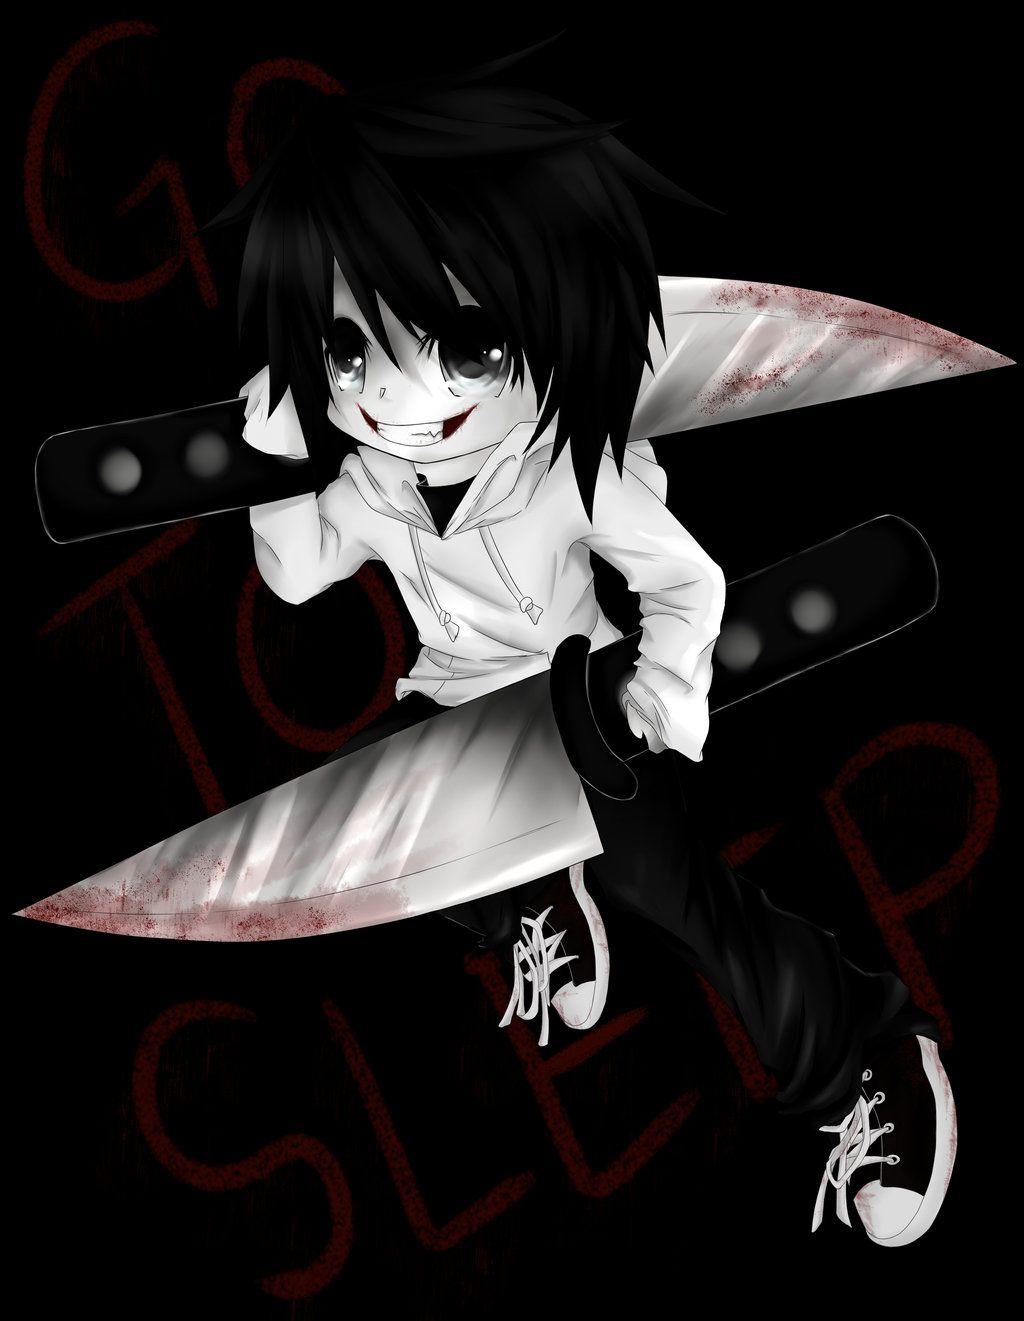 Trollface and Jeff the Killer girl fanart 2  AI Anime Girls as  Creepypasta Images  Know Your Meme